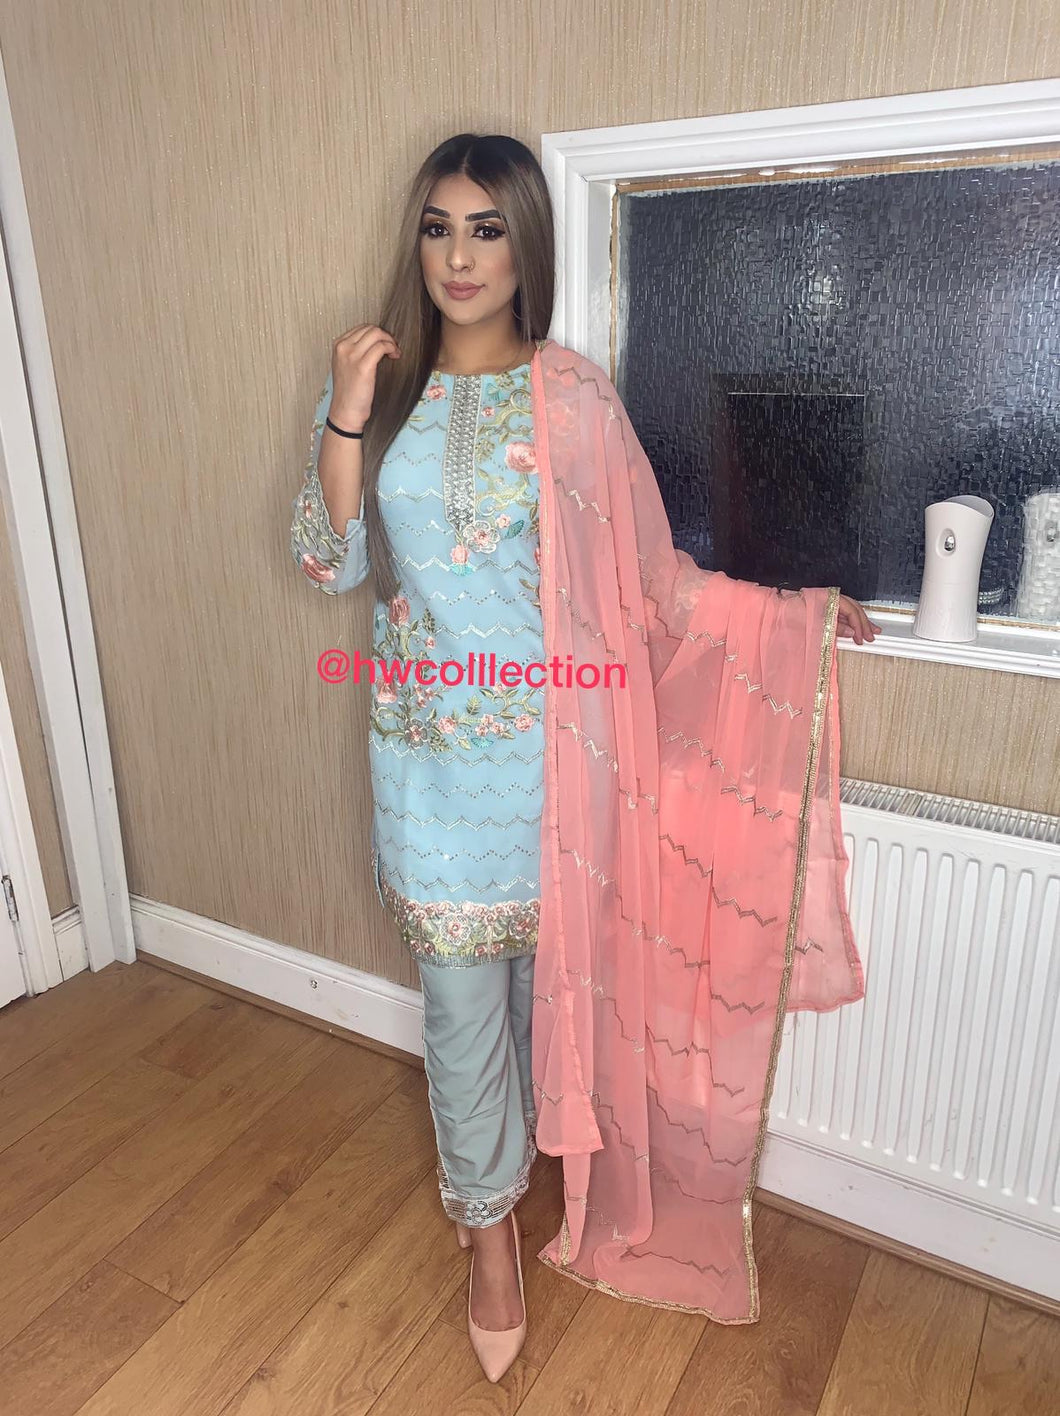 3pc Light Blue Embroidered Shalwar Kameez with Pink embroidered Dupatta Stitched Suit Ready to wear